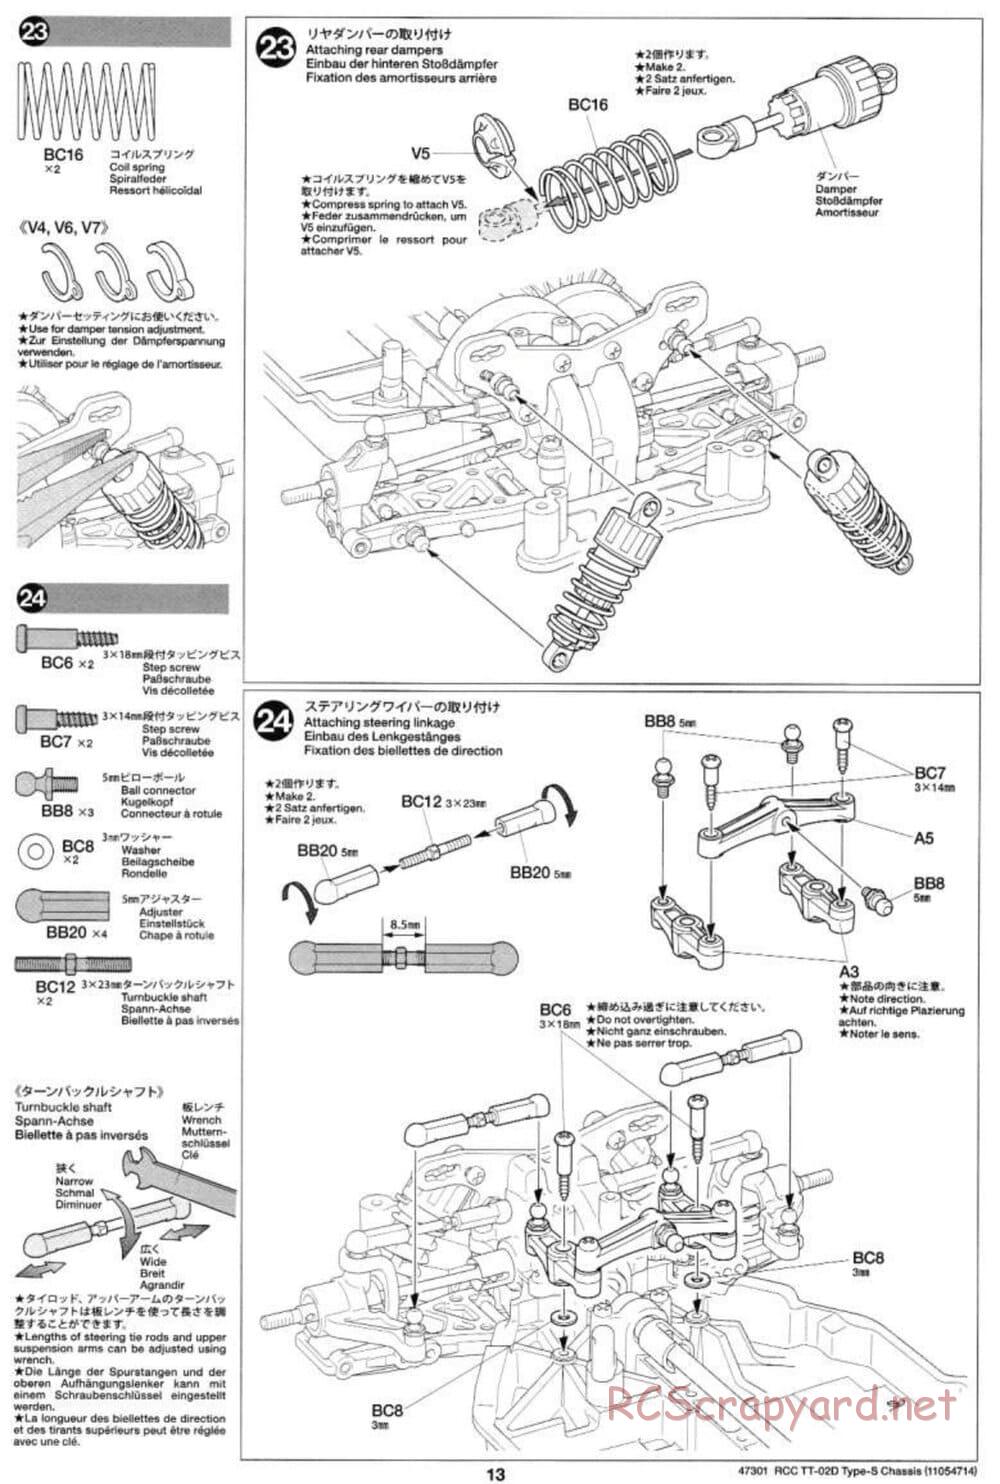 Tamiya - TT-02D Type-S Chassis - Manual - Page 13